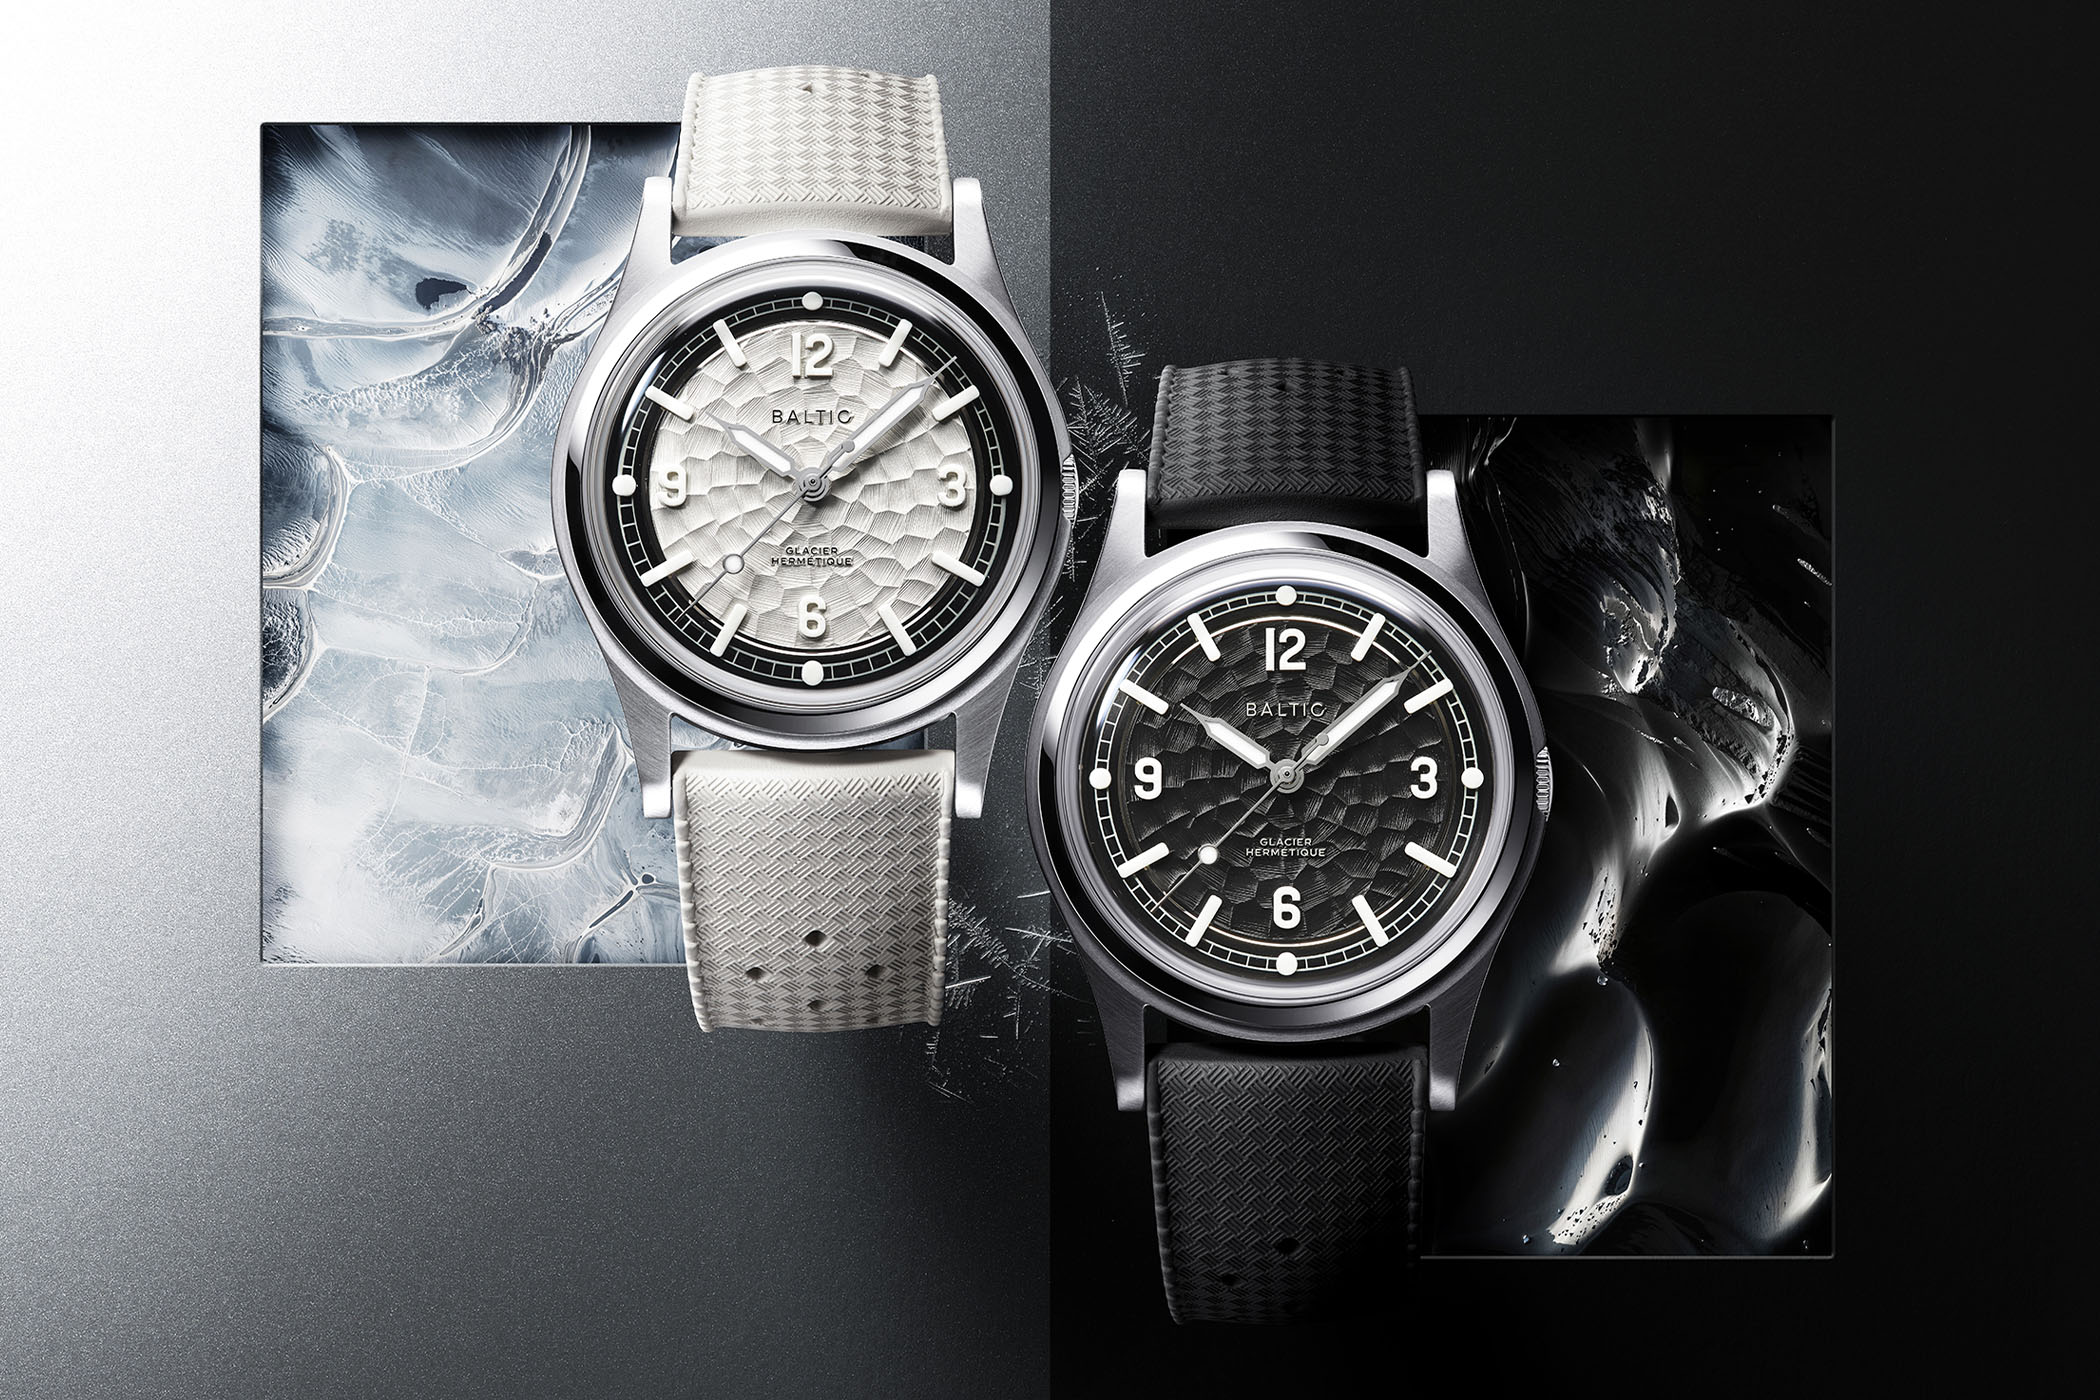 New Baltic Hermétique Glacier Limited Edition Watches